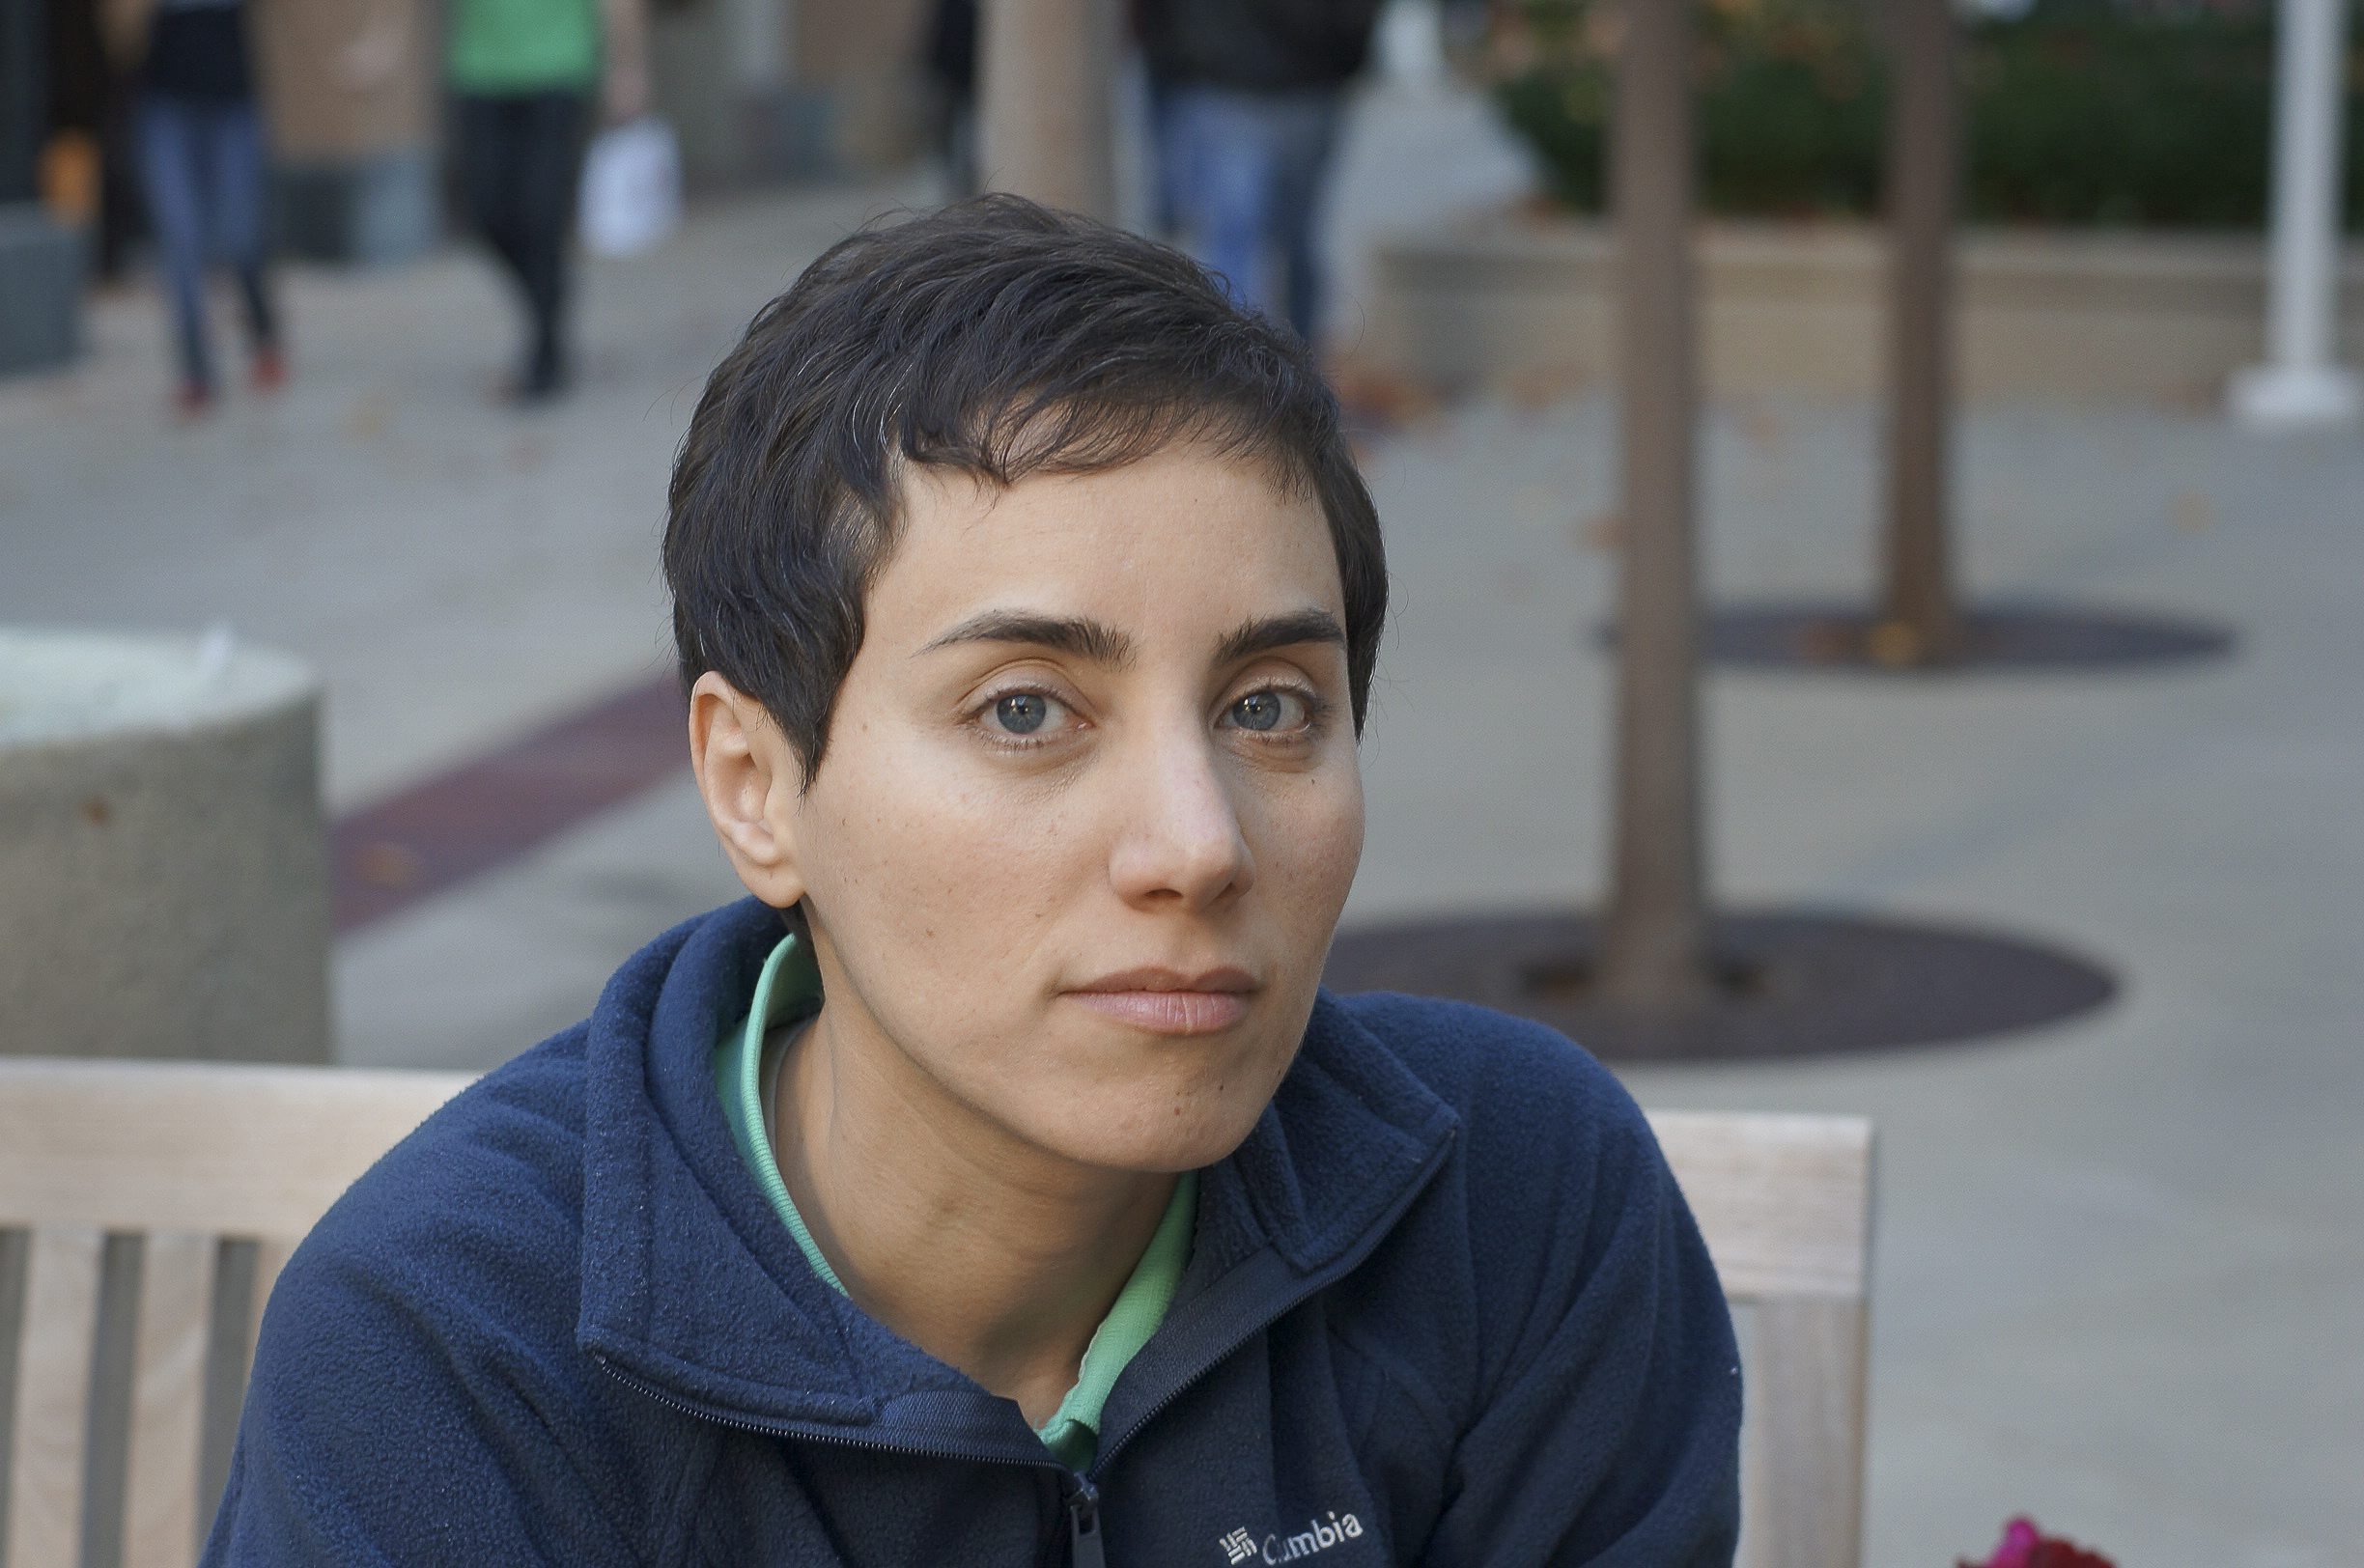 First woman to win Fields Medal in mathematics